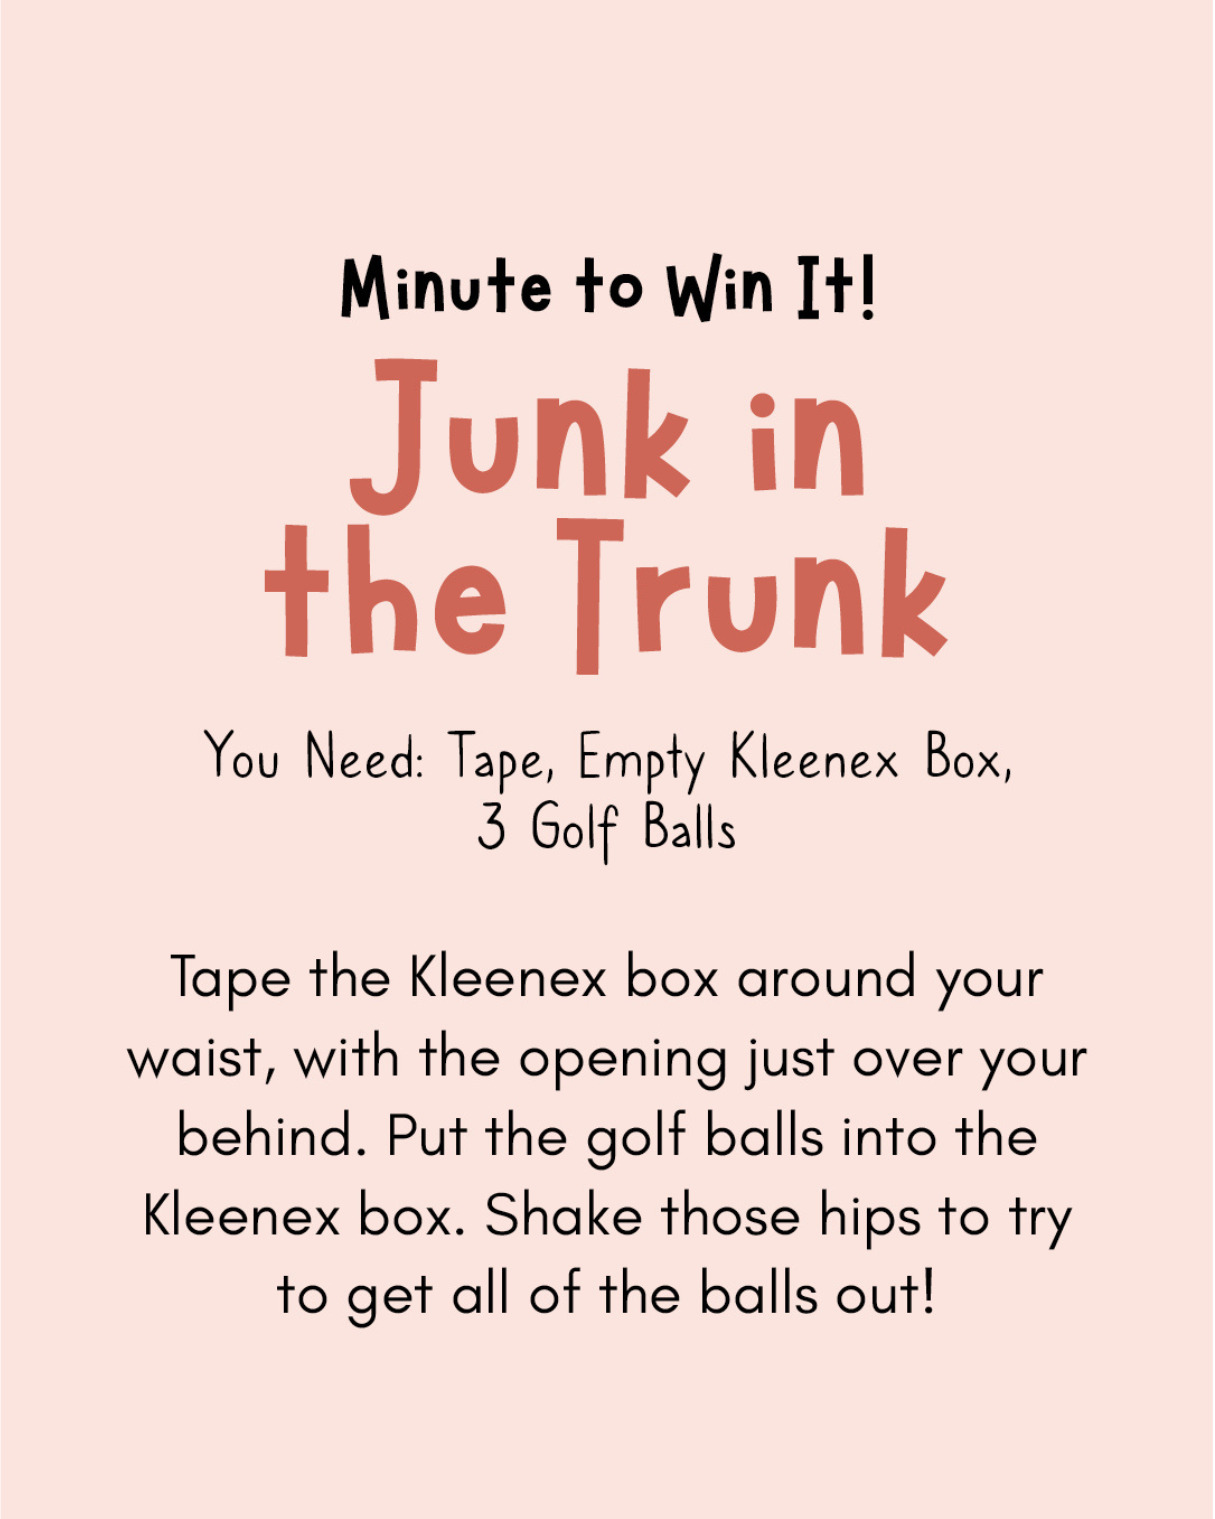 Minute to Win It Games for Families: Junk in the Trunk